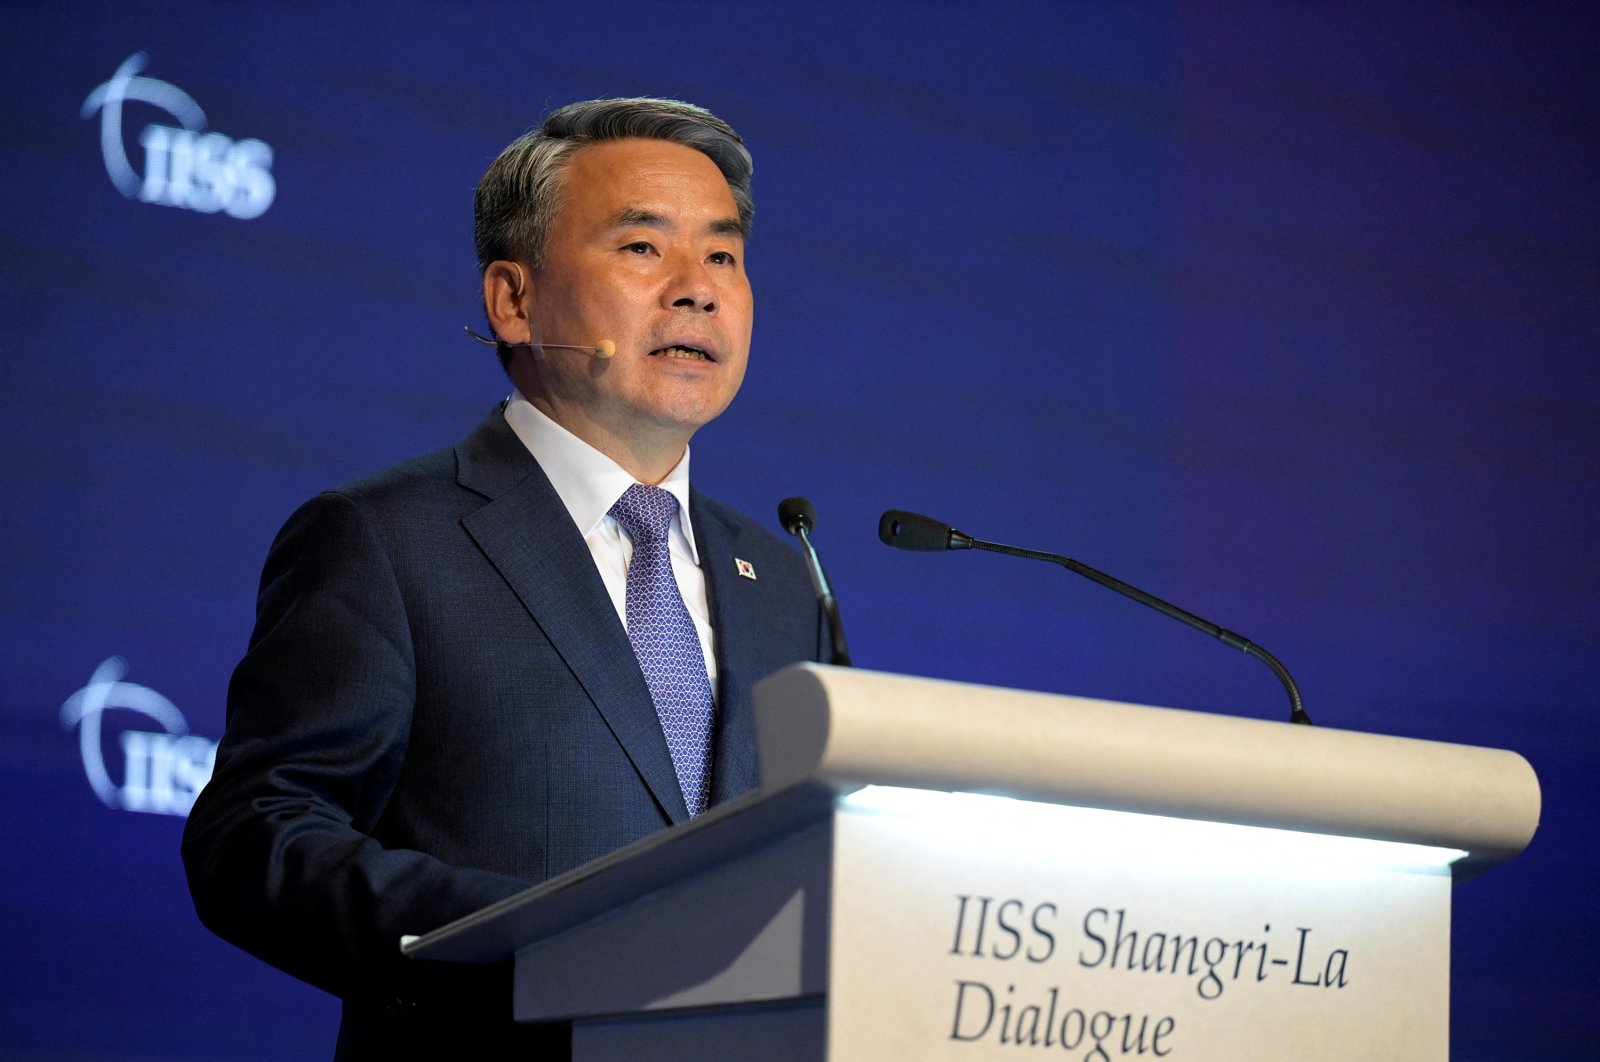 South Korean Minister of National Defense Lee Jong-Sup speaks at a plenary session during the 19th Shangri-La Dialogue in Singapore, June 12, 2022. (Reuters Photo)